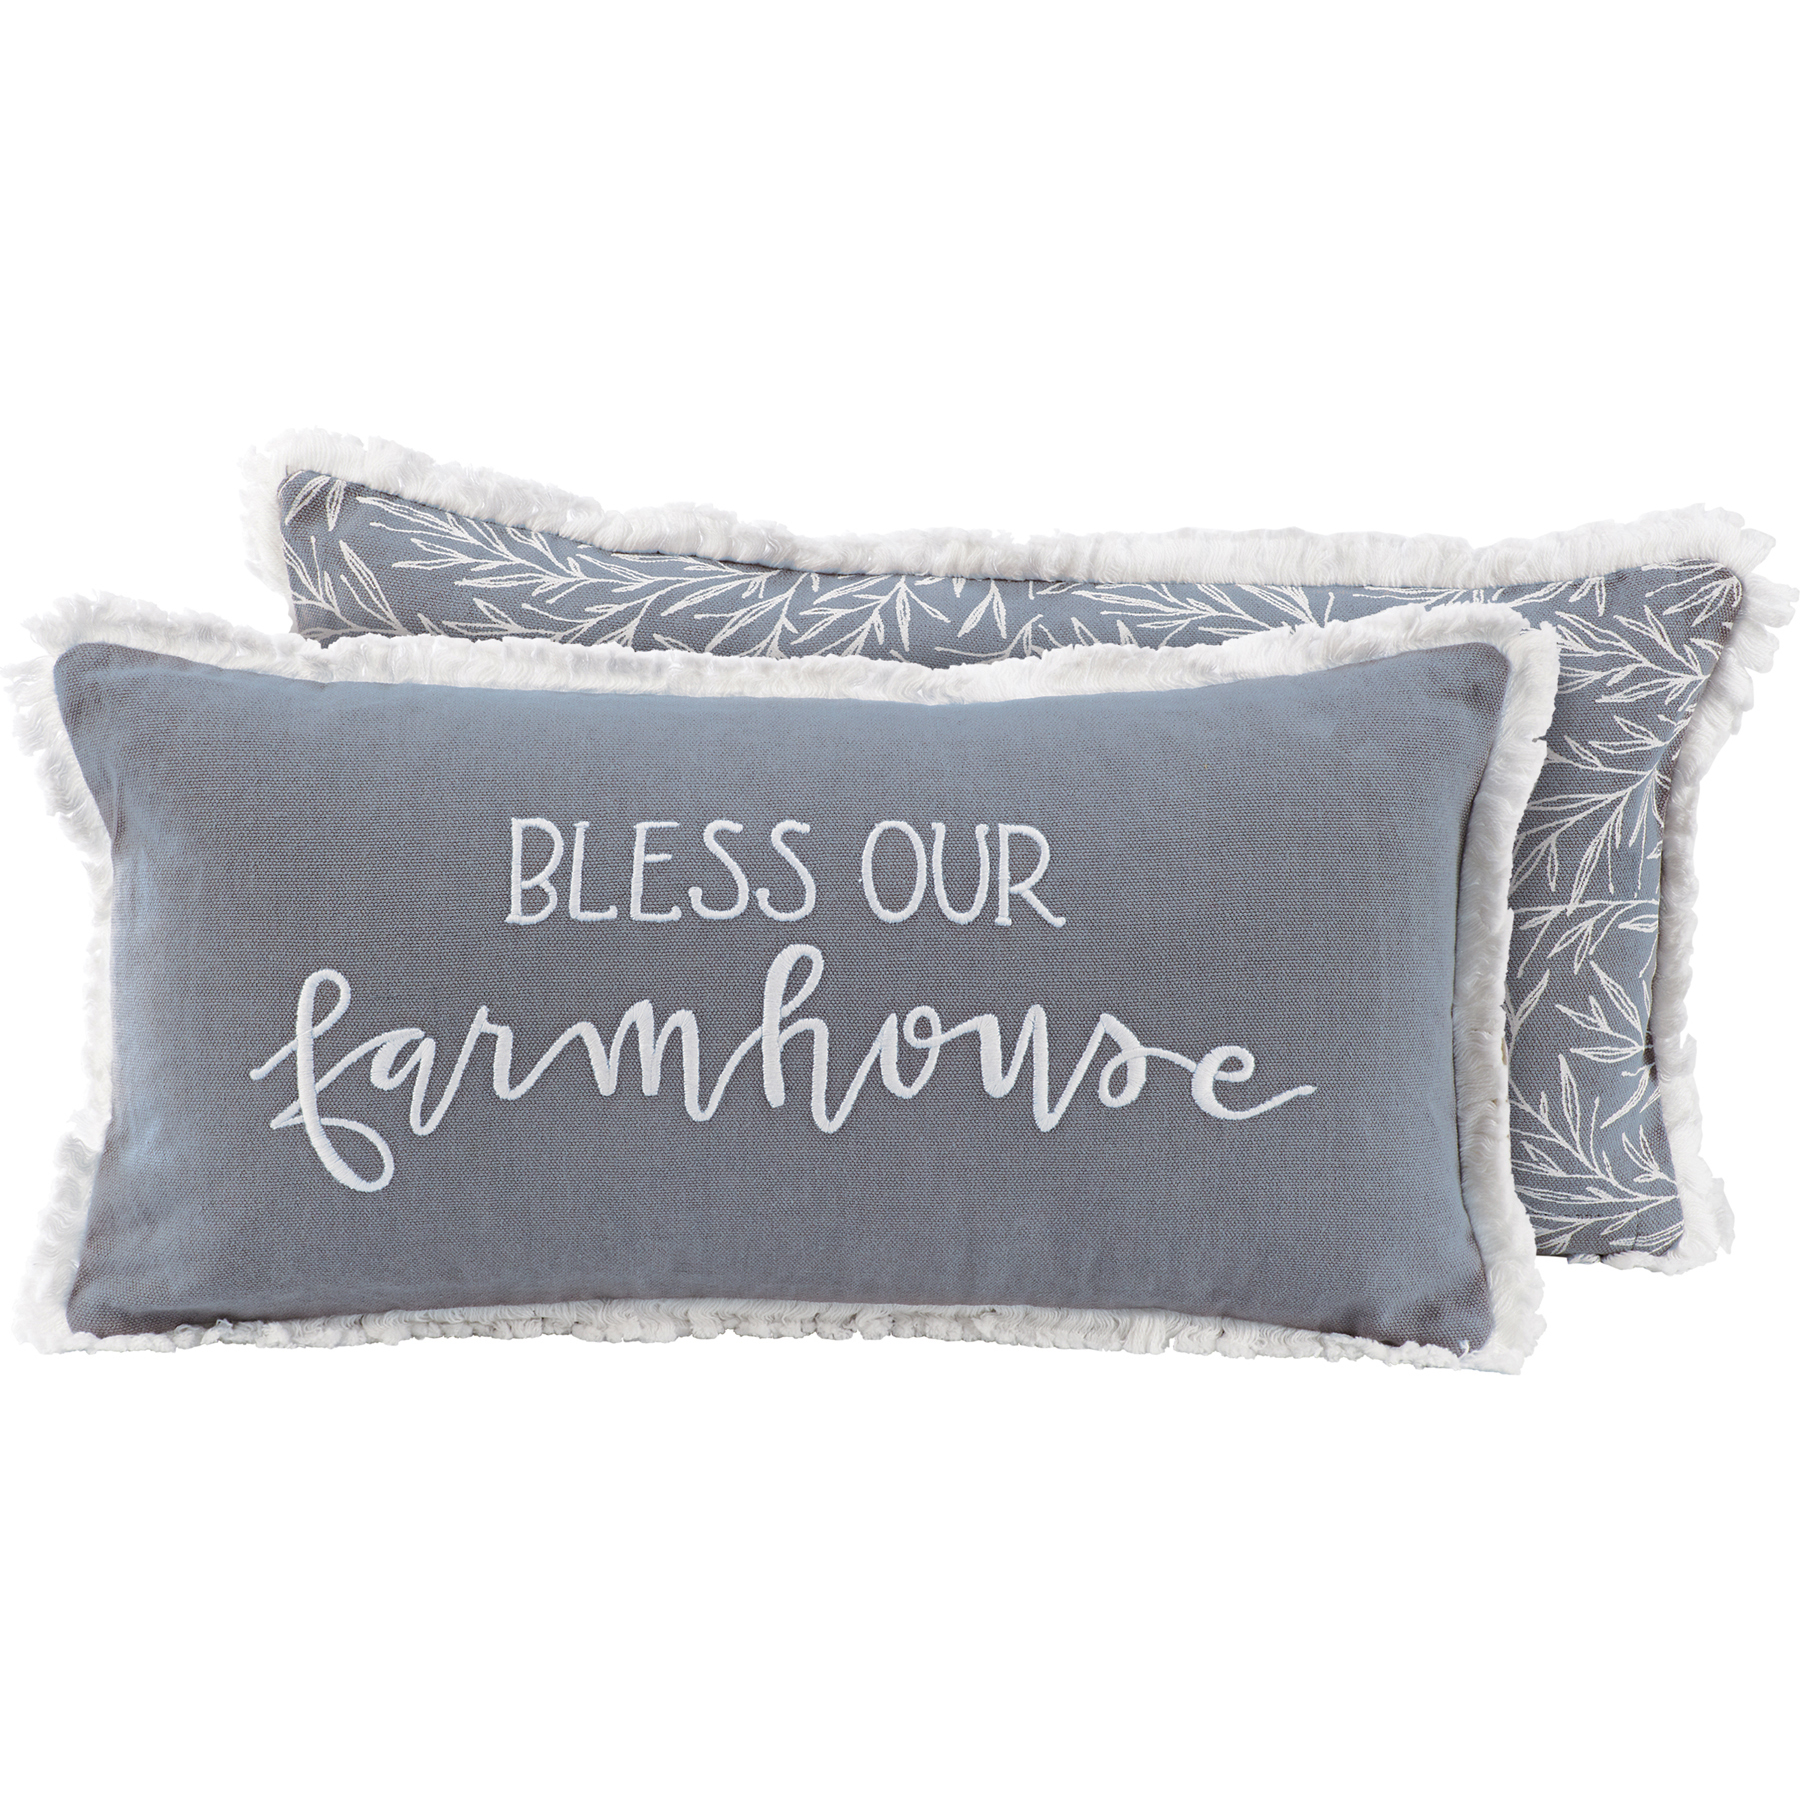 I Love Us Pillow  Primitives By Kathy